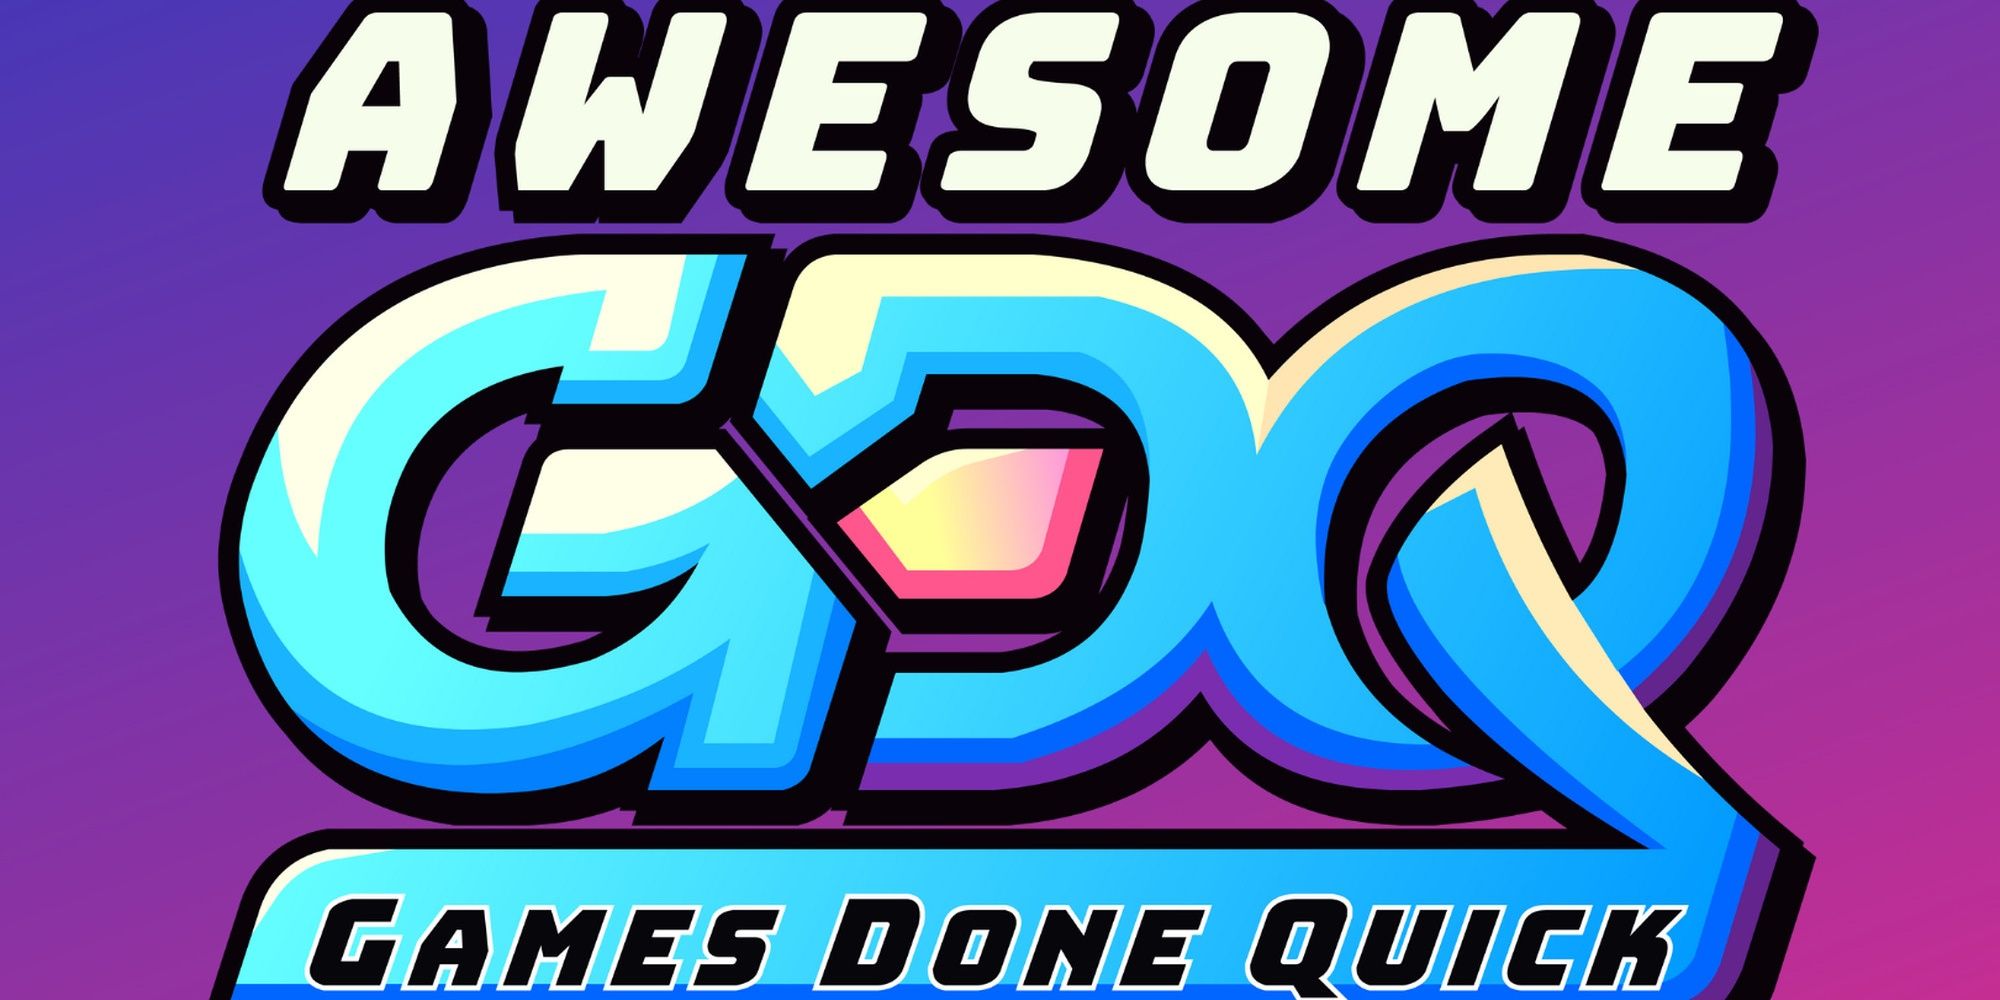 Awesome Games Done Quick logo set against a purple gradient background.